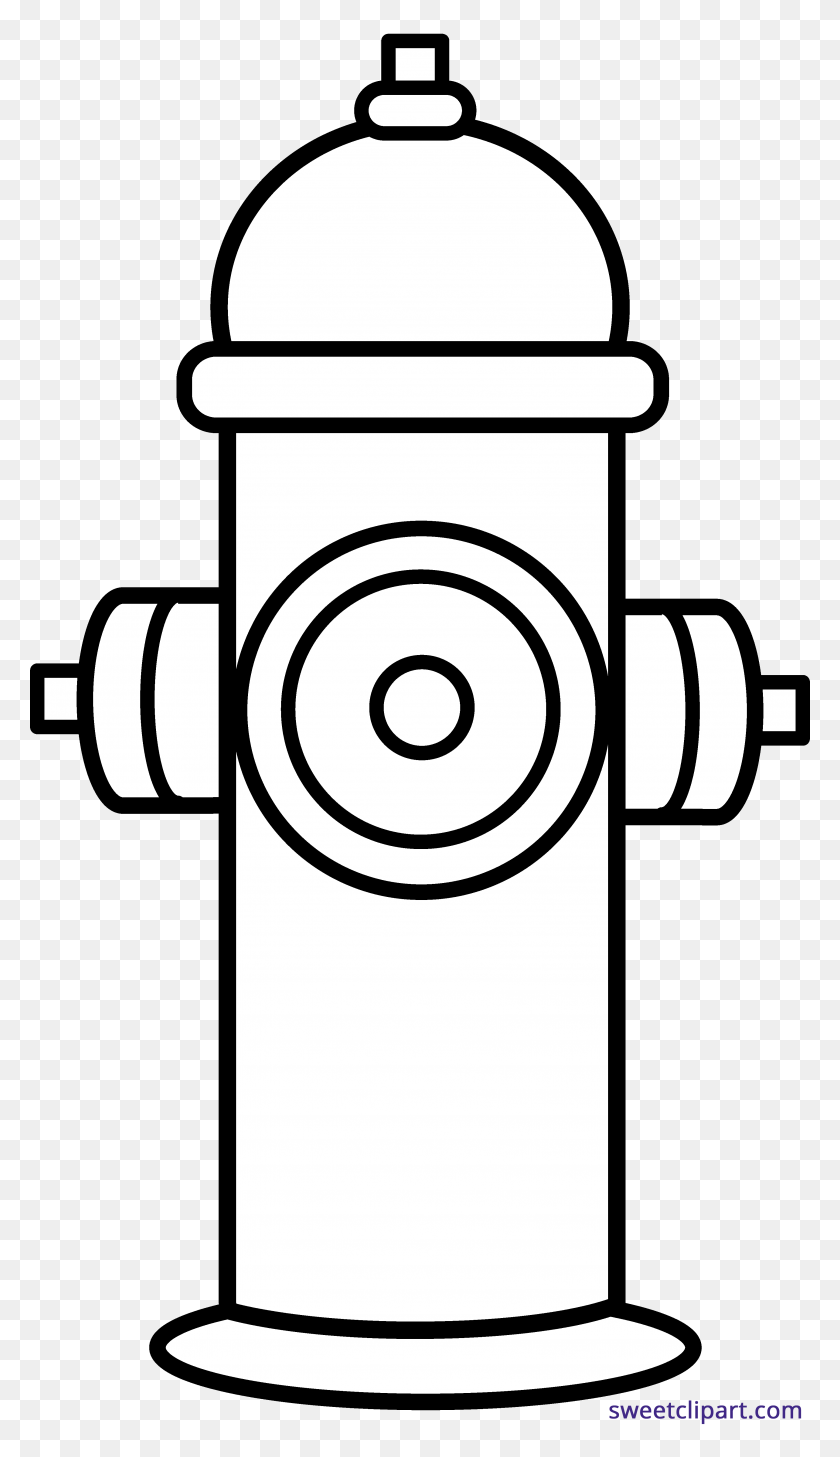 3349x5999 Fire Hydrant Line Art Clipart - Fire Black And White Clipart